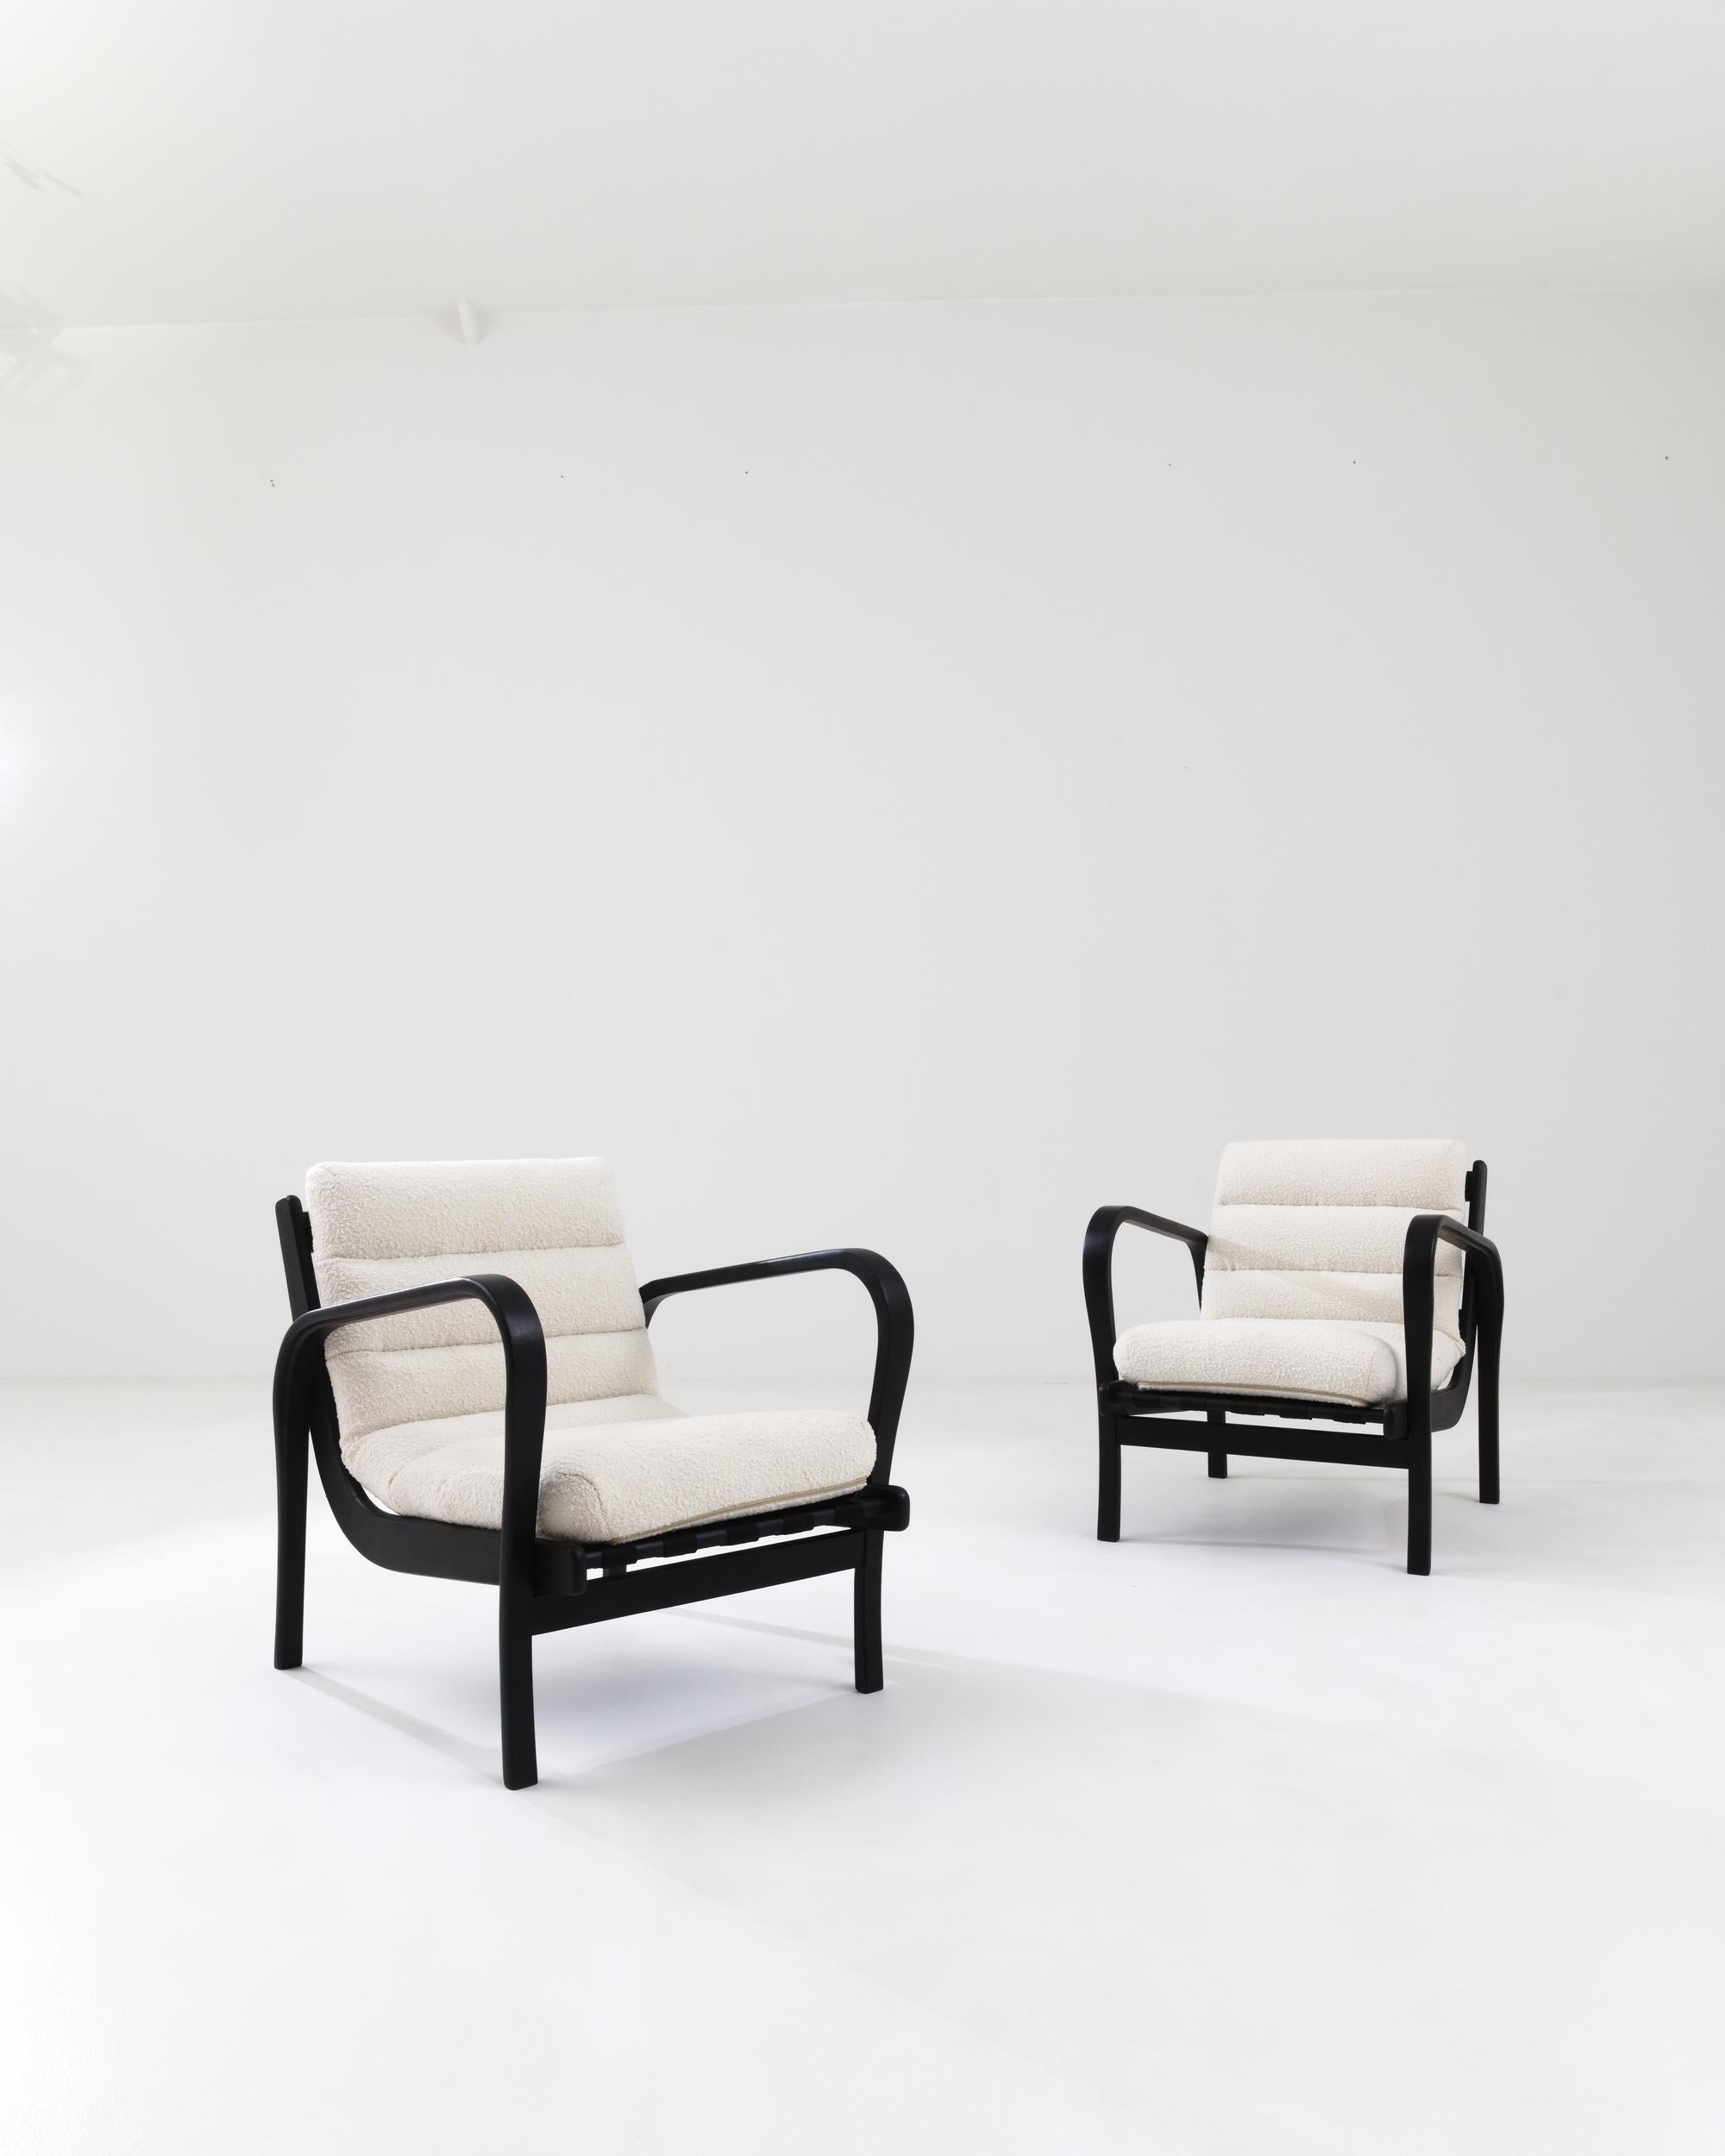 A pair of wooden upholstered armchairs from mid-20th century Czechia by Karel Kozelka and Antonin Kropacek. Characteristic of mid-century Czech design, this pair of armchairs combines a straightforward industrial construction with a sleek and